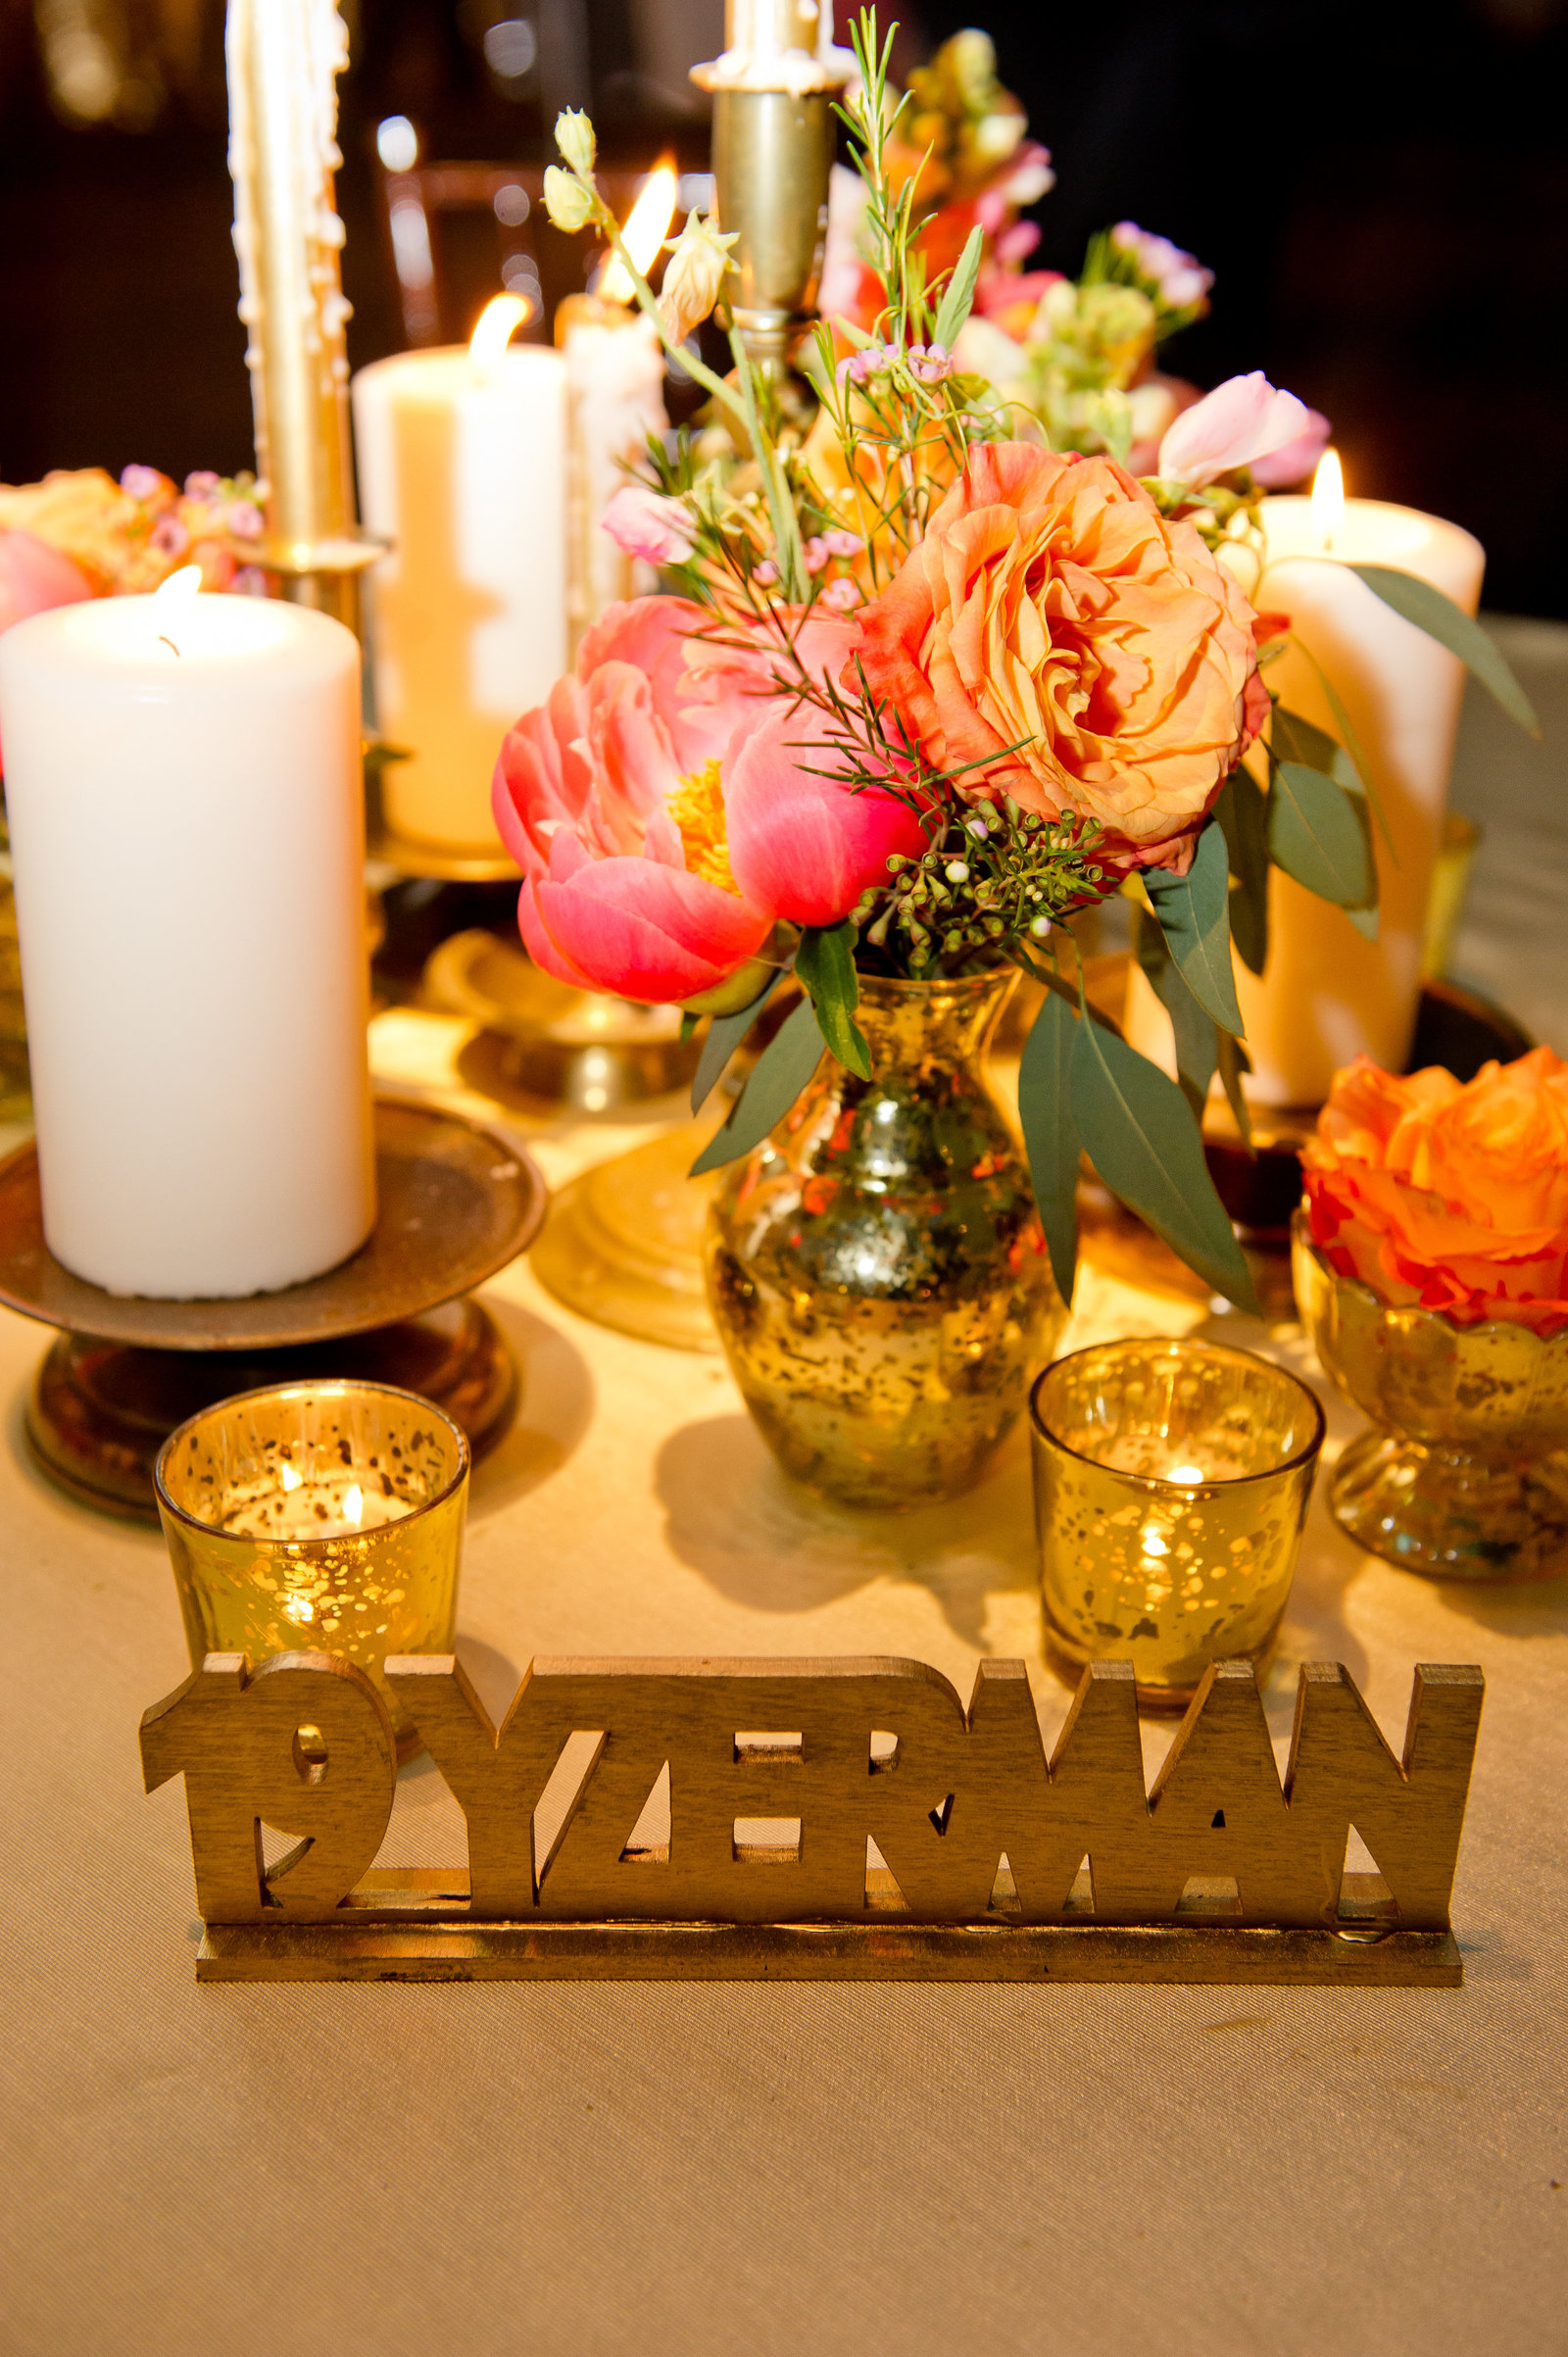 Custom event decor and table names by Ten23design with florals by A Garden Party for Jewish wedding ceremony and reception at Adventure Aquarium